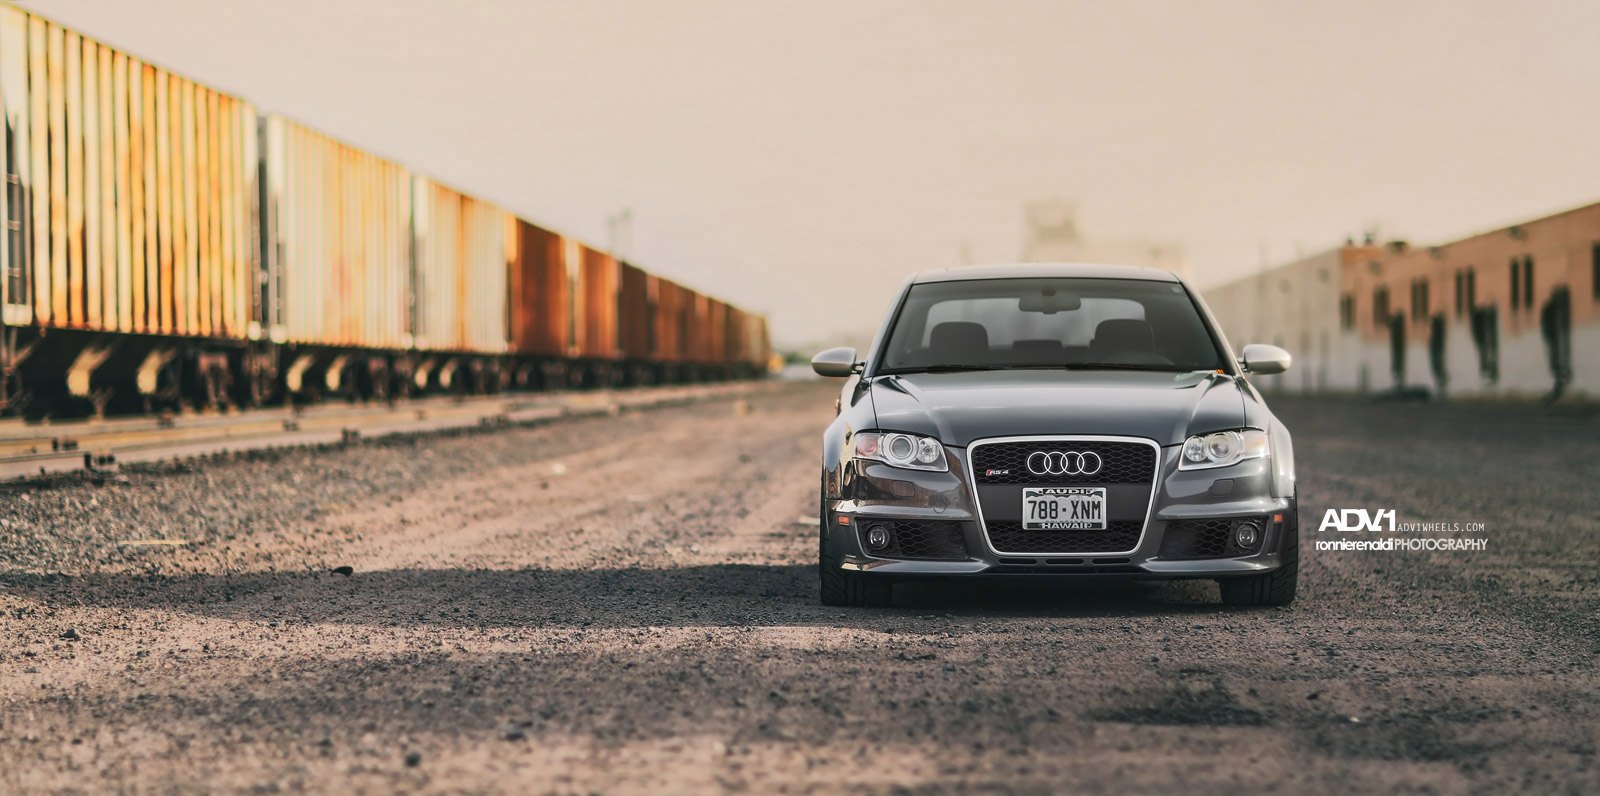 Silver Audi S4 with Halo Headlights - Photo by ADV.1